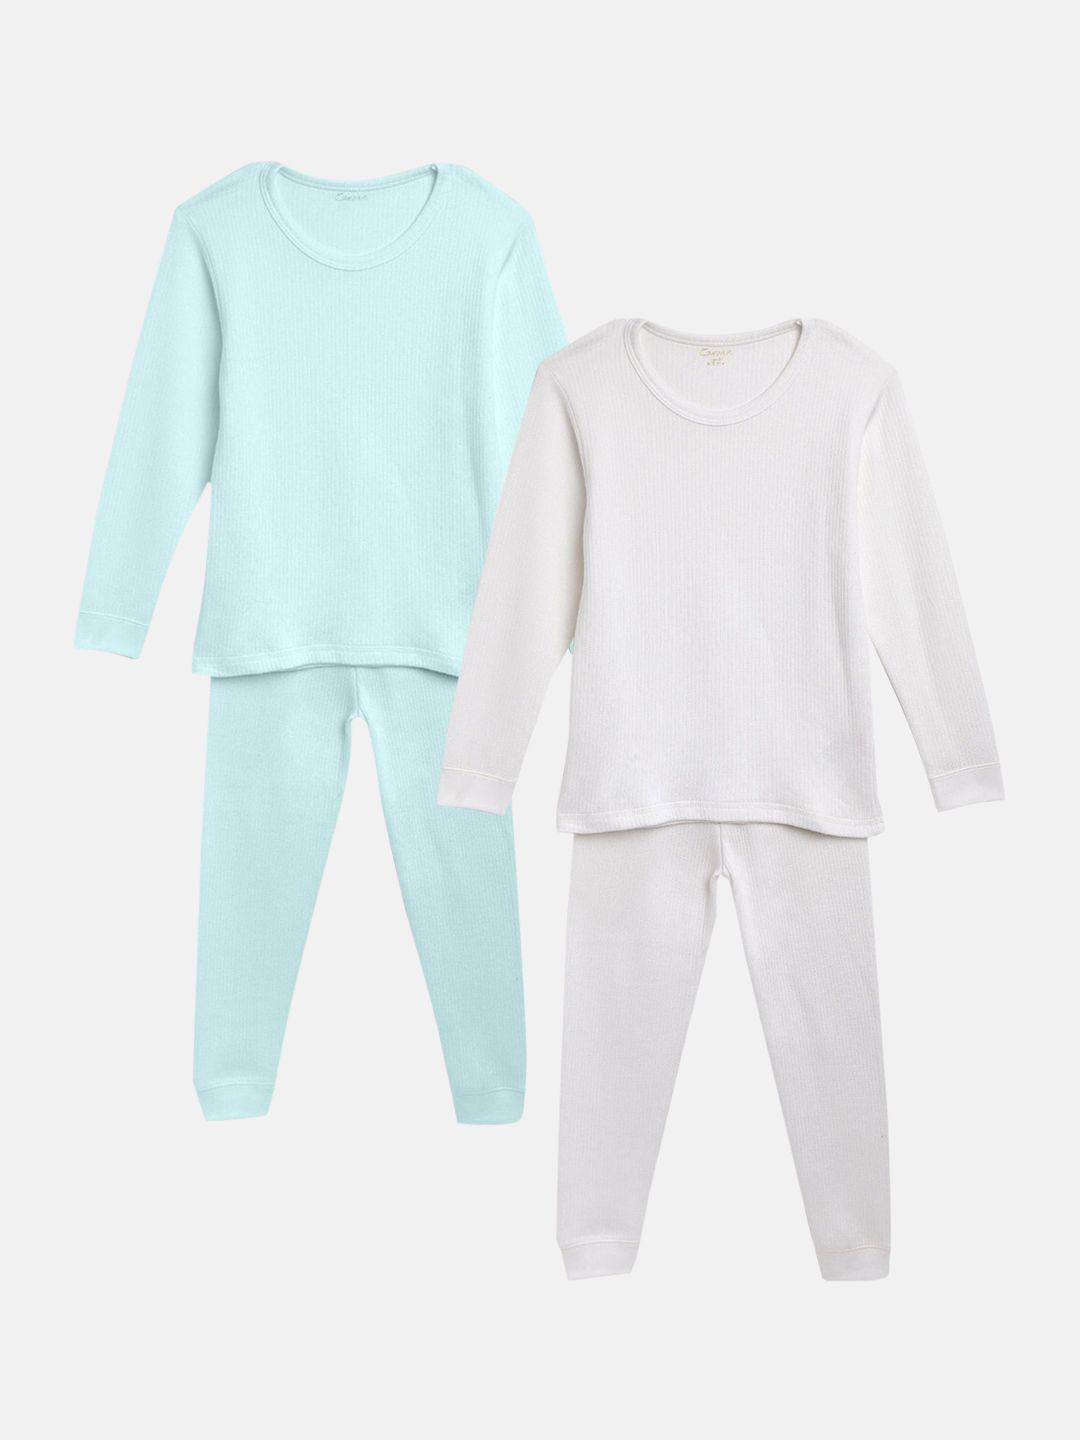 kanvin boys pack of 2 solid thermal set